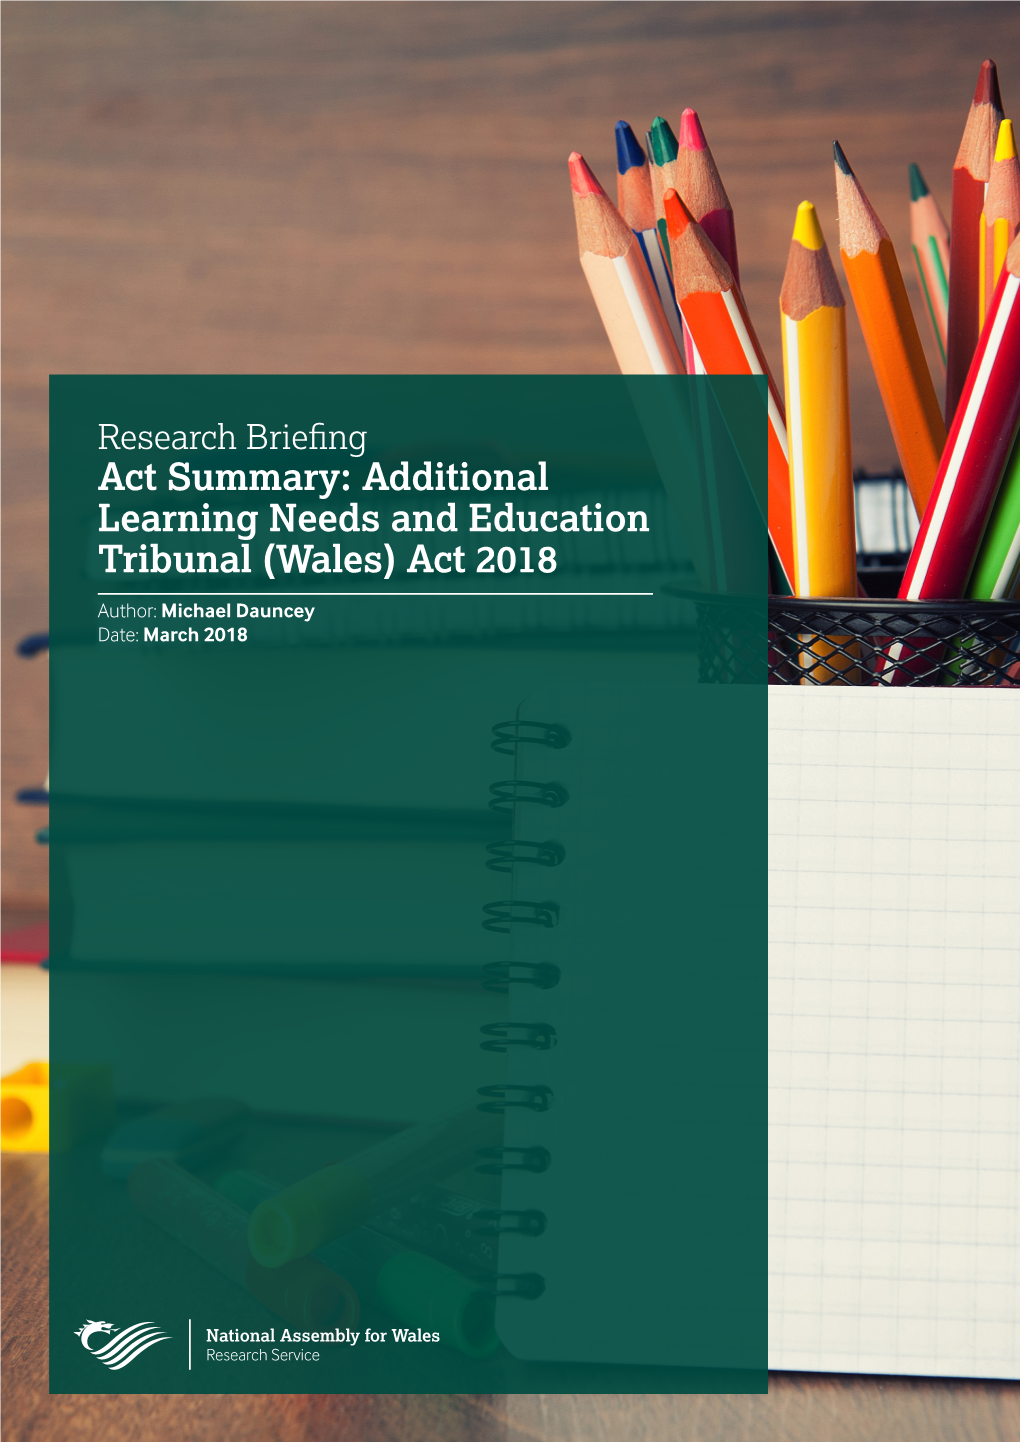 Additional Learning Needs and Education Tribunal (Wales) Act 2018 Author: Michael Dauncey Date: March 2018